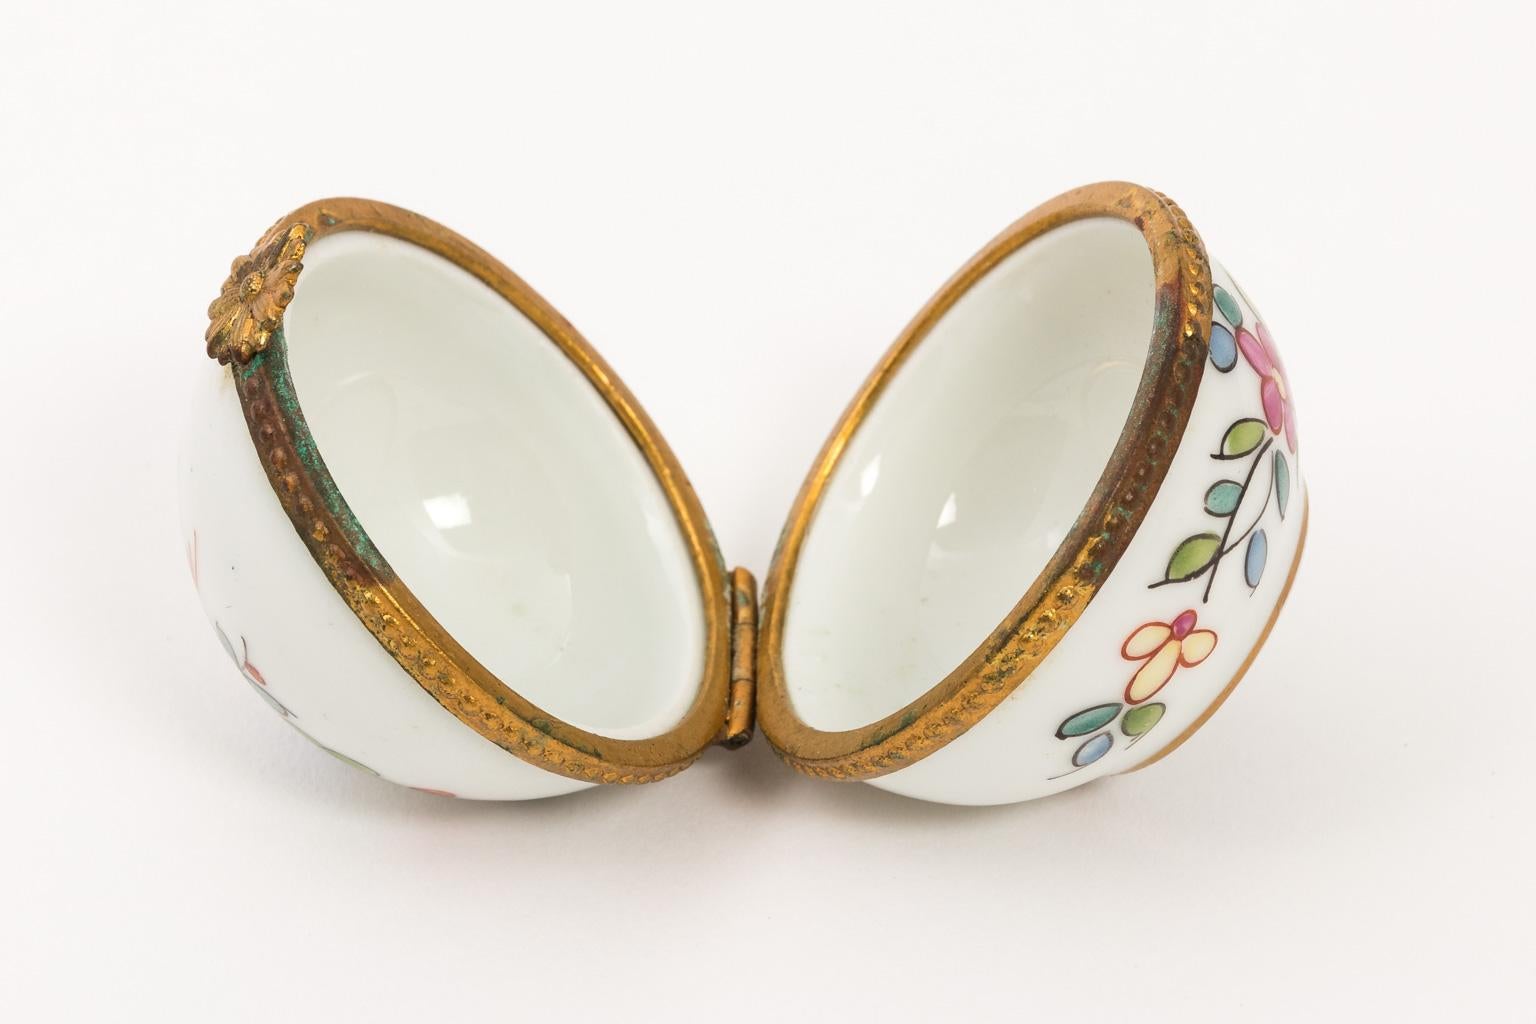 Tiffany & Co. exclusive Limoges hand painted porcelain box, circa 20th century. Please note of minor oxidation to the metal hardware due to wear with age.